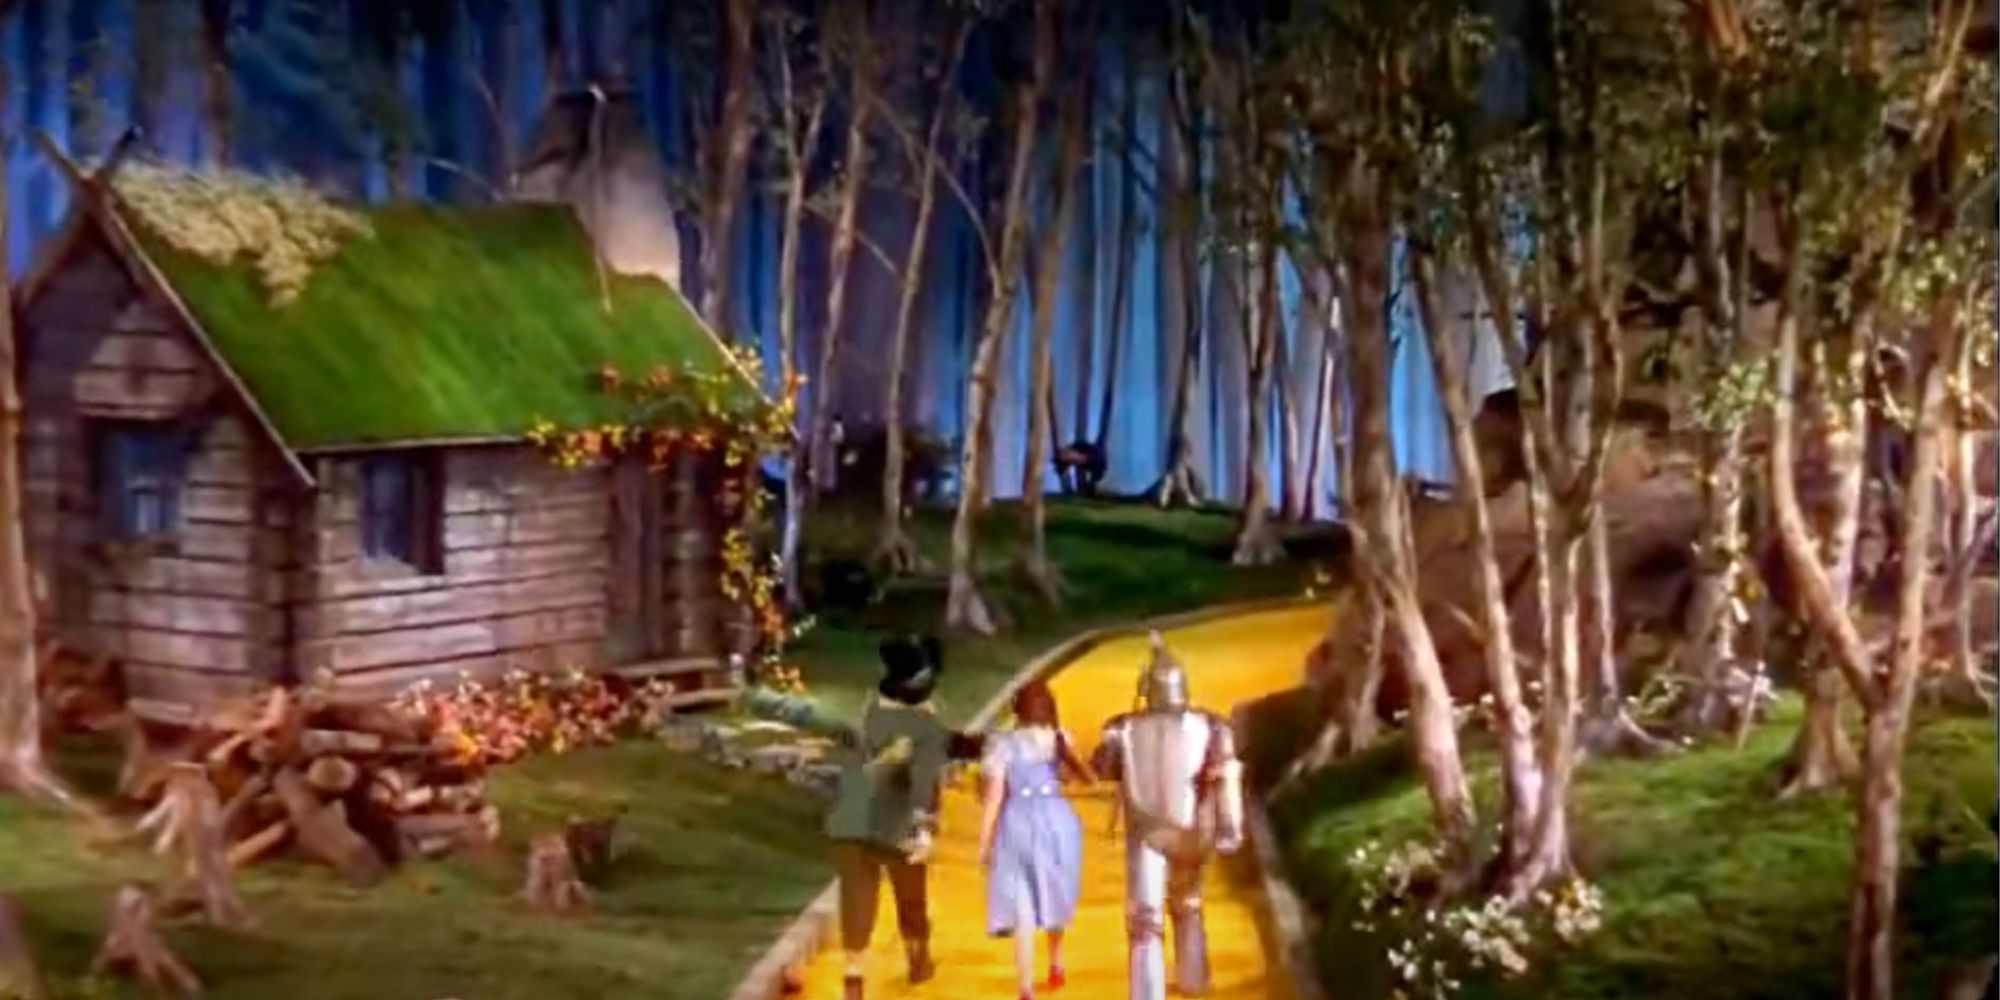 The Scarecrow, Dorothy, and the Tin Man skip merrily along the yellow brick road against a forest backdrop, with something moving in the background